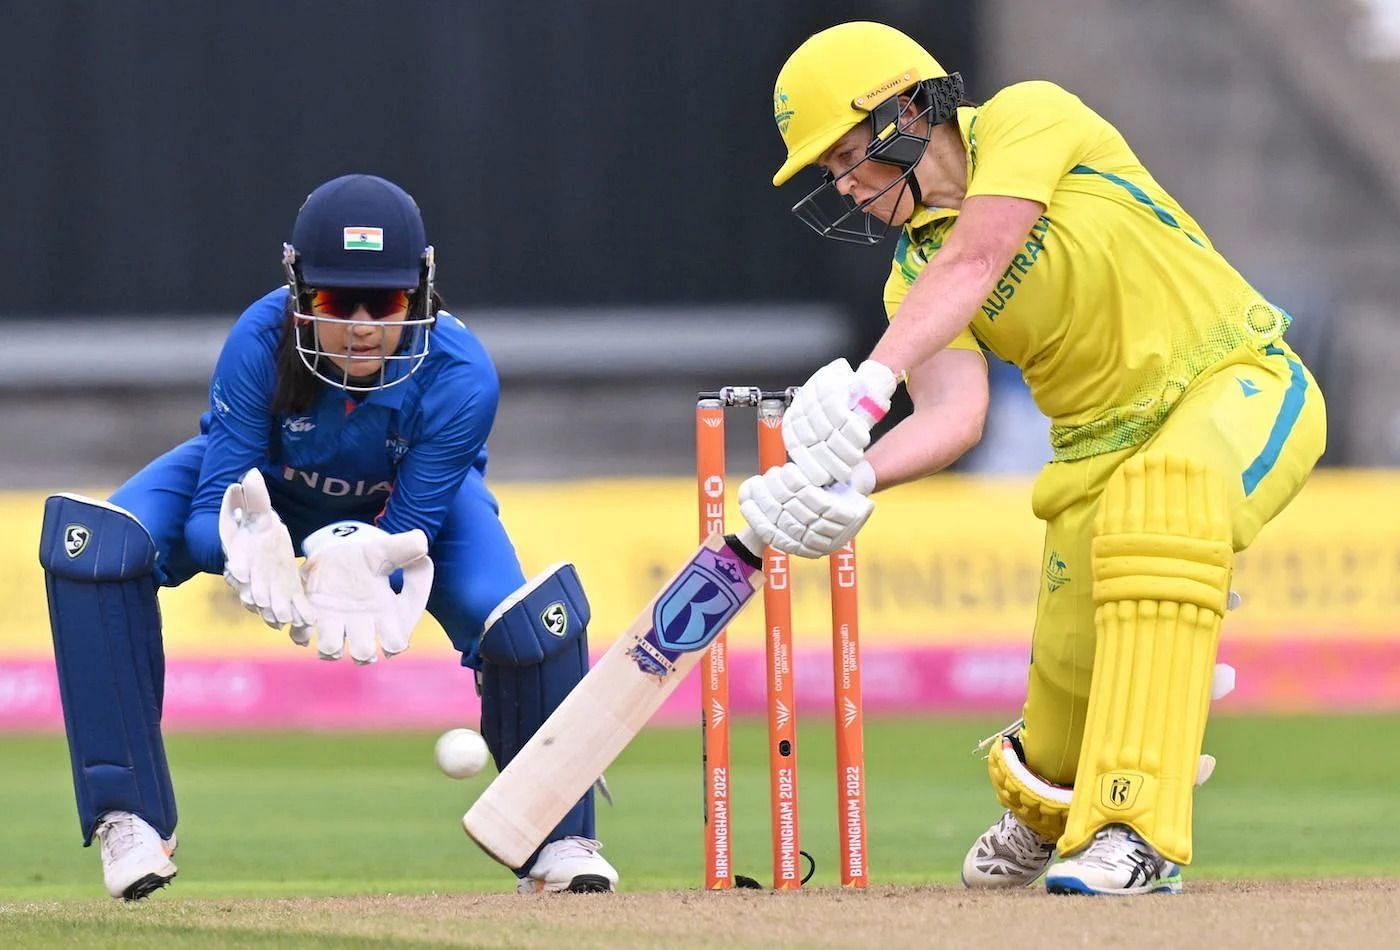 All-rounder Grace Harris has replaced the injured right-arm fast bowler Darcie Brown in Australia